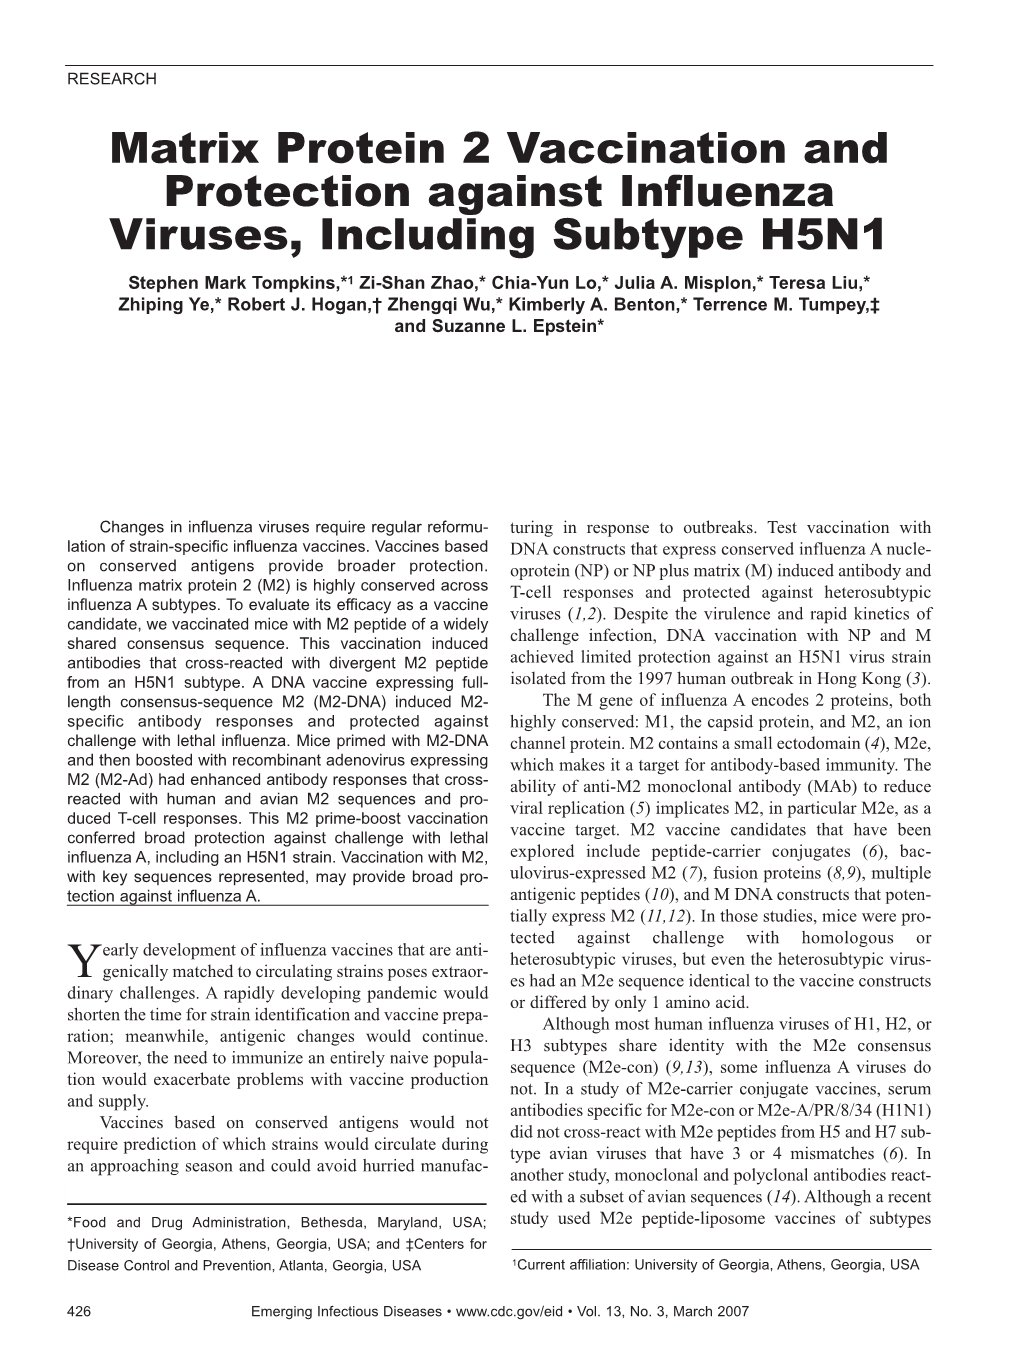 Matrix Protein 2 Vaccination and Protection Against Influenza Viruses, Including Subtype H5N1 Stephen Mark Tompkins,*1 Zi-Shan Zhao,* Chia-Yun Lo,* Julia A